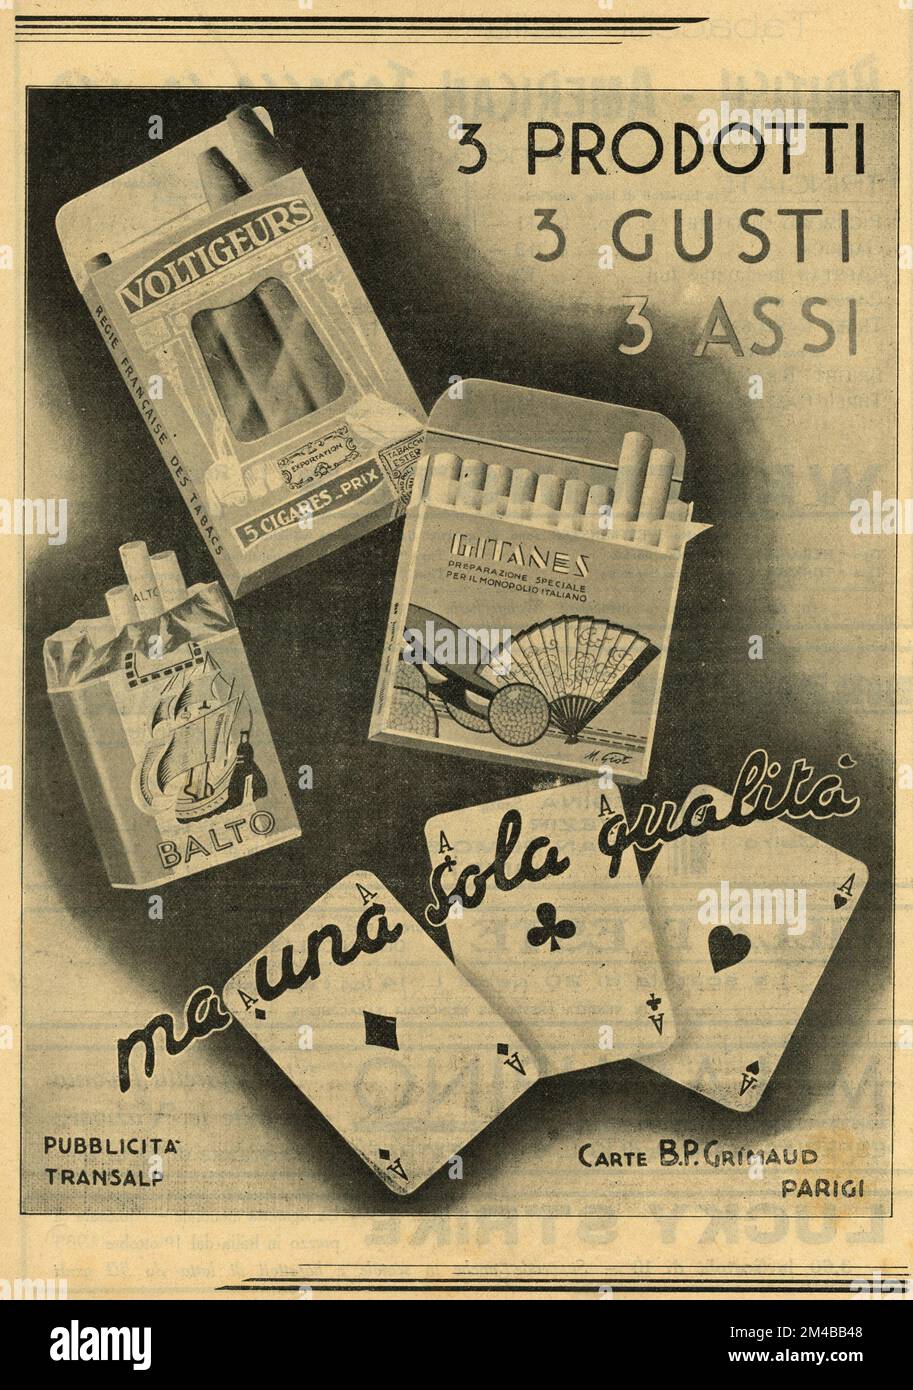 Vintage newspaper ad of Grimaud playing cards and cigarettes Balto, Gitanes and Voltigeurs cigar, Italy 1930s Stock Photo